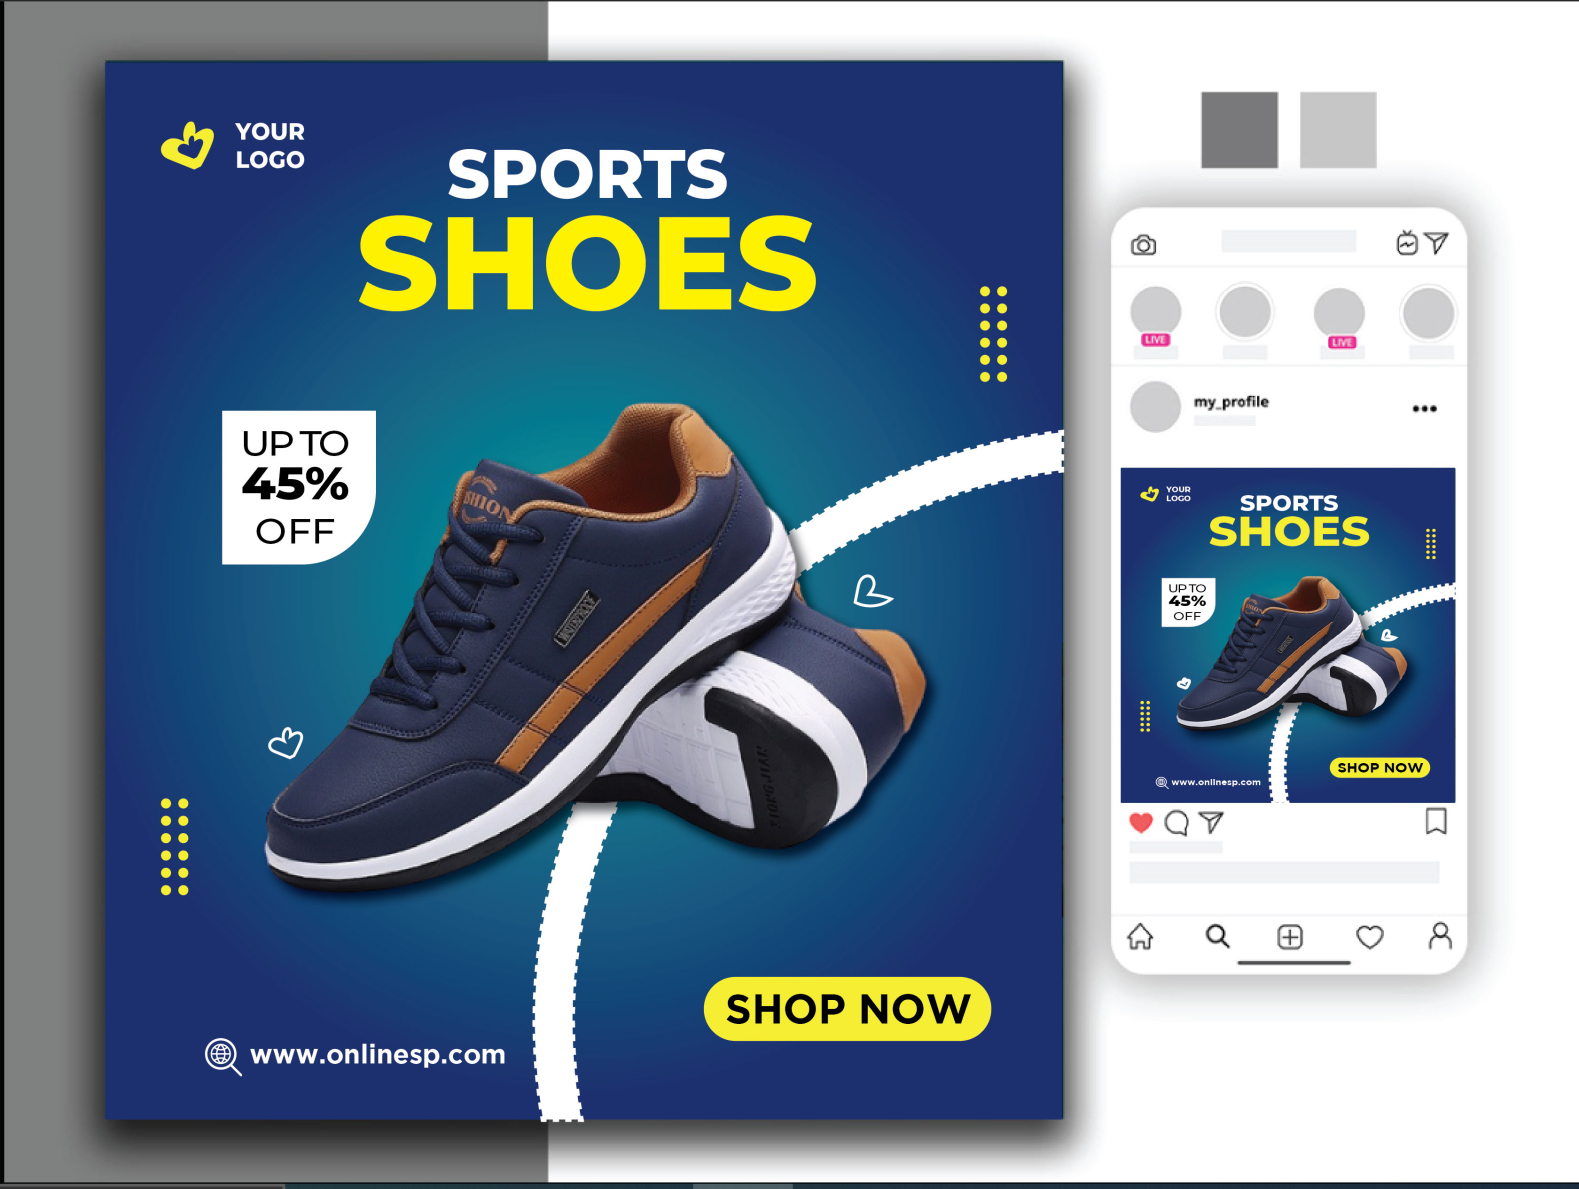 instagram Shoes ad design by Bayzid Ahmmed on Dribbble